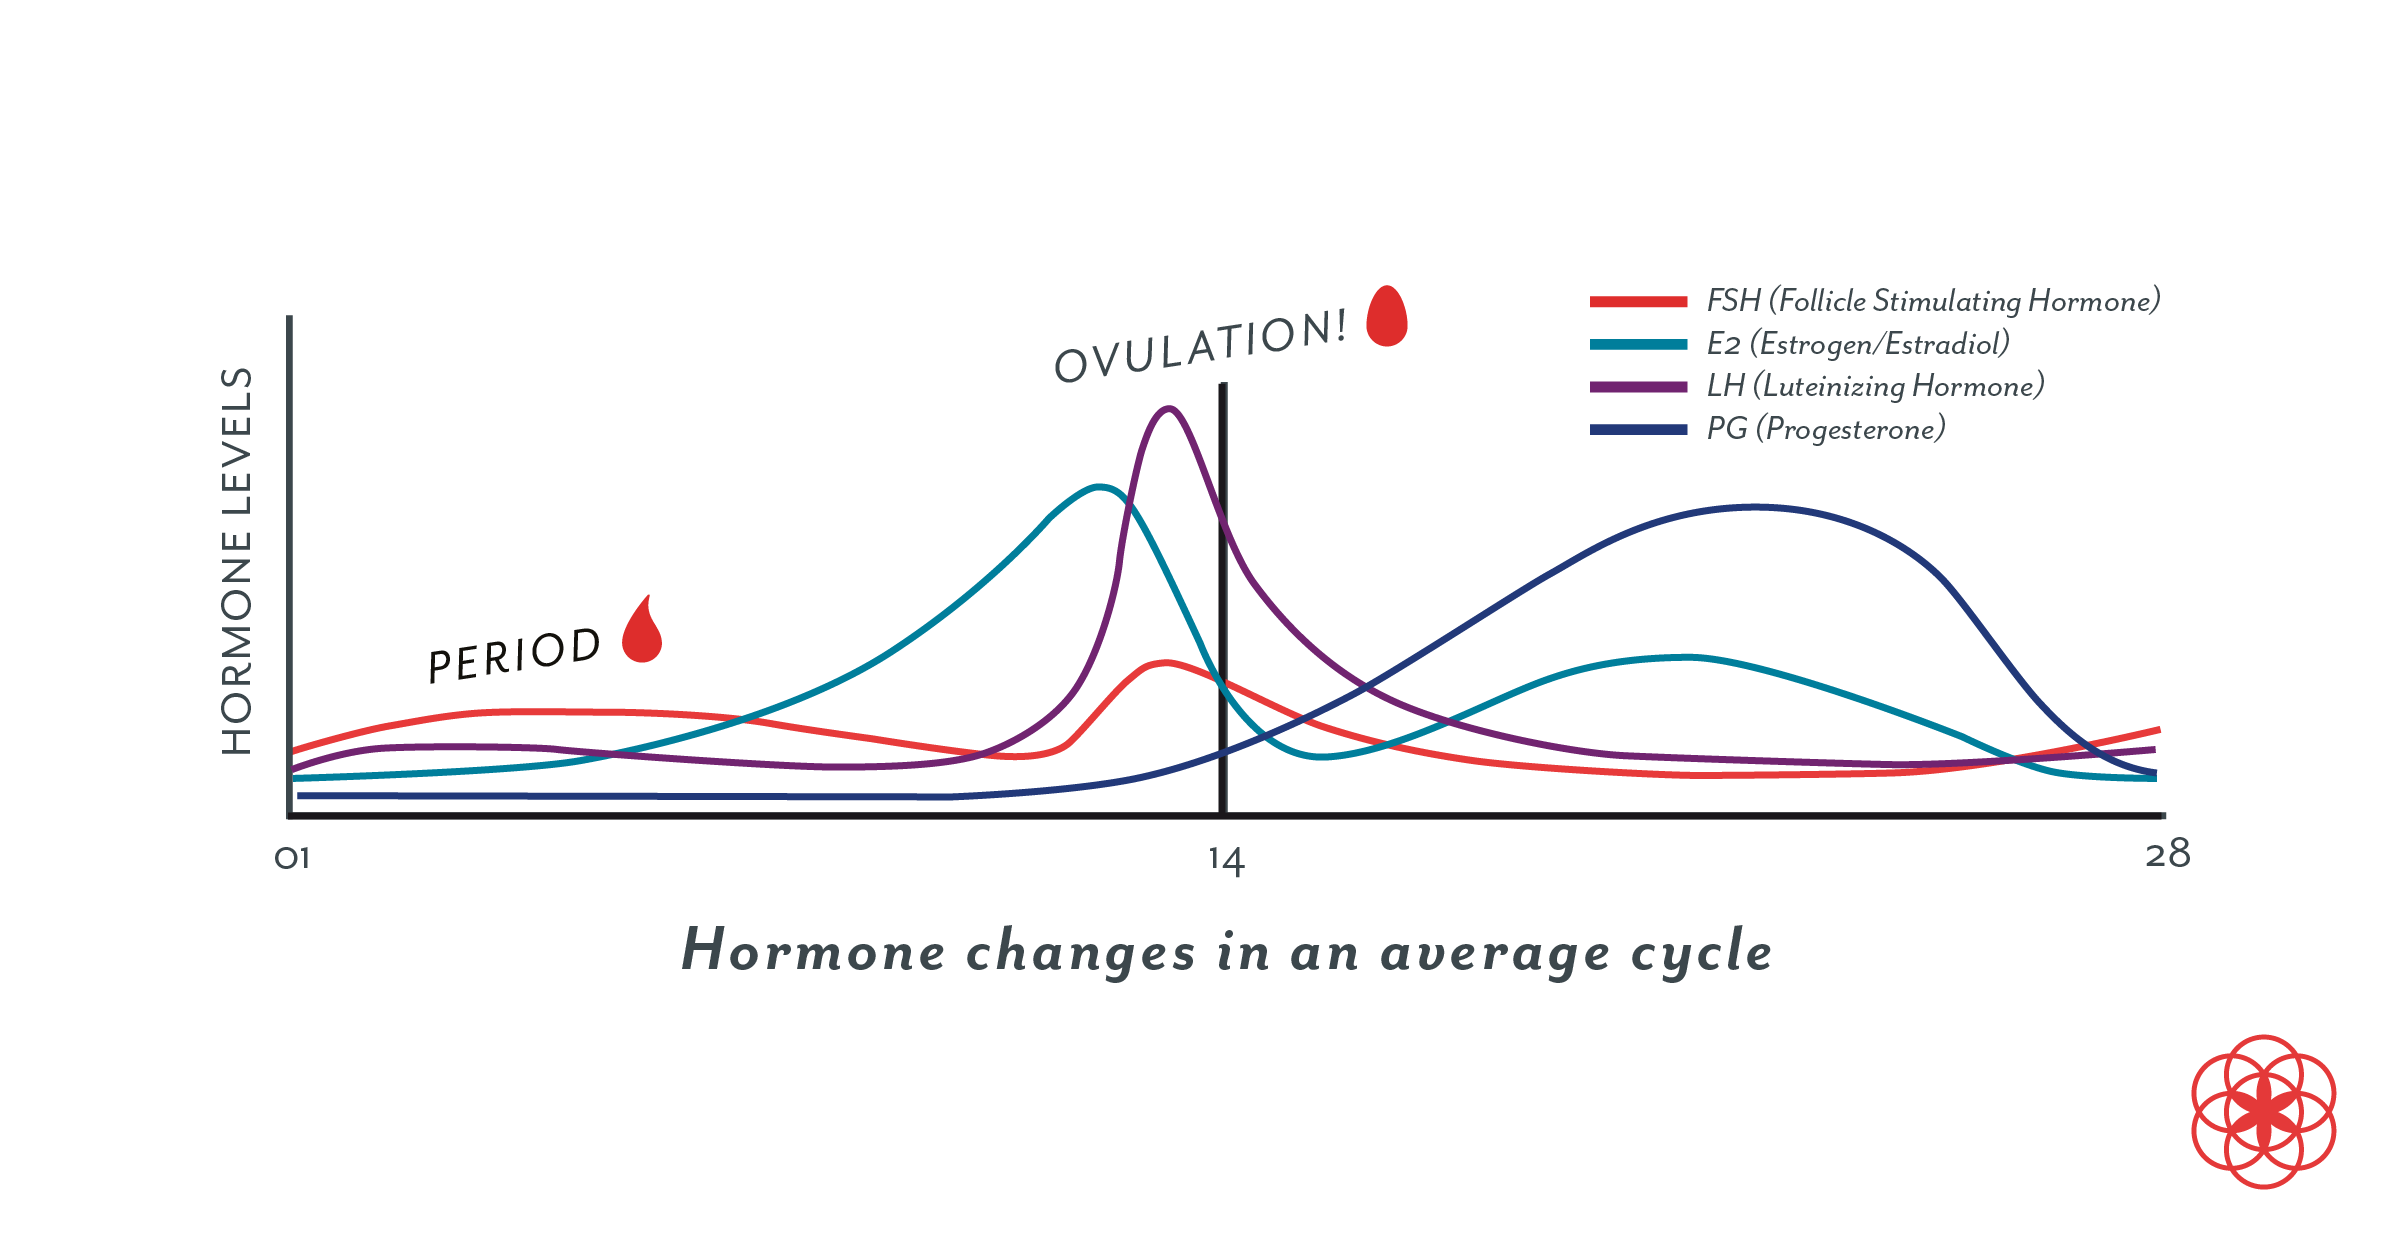 After ovulation = higher progesterone.